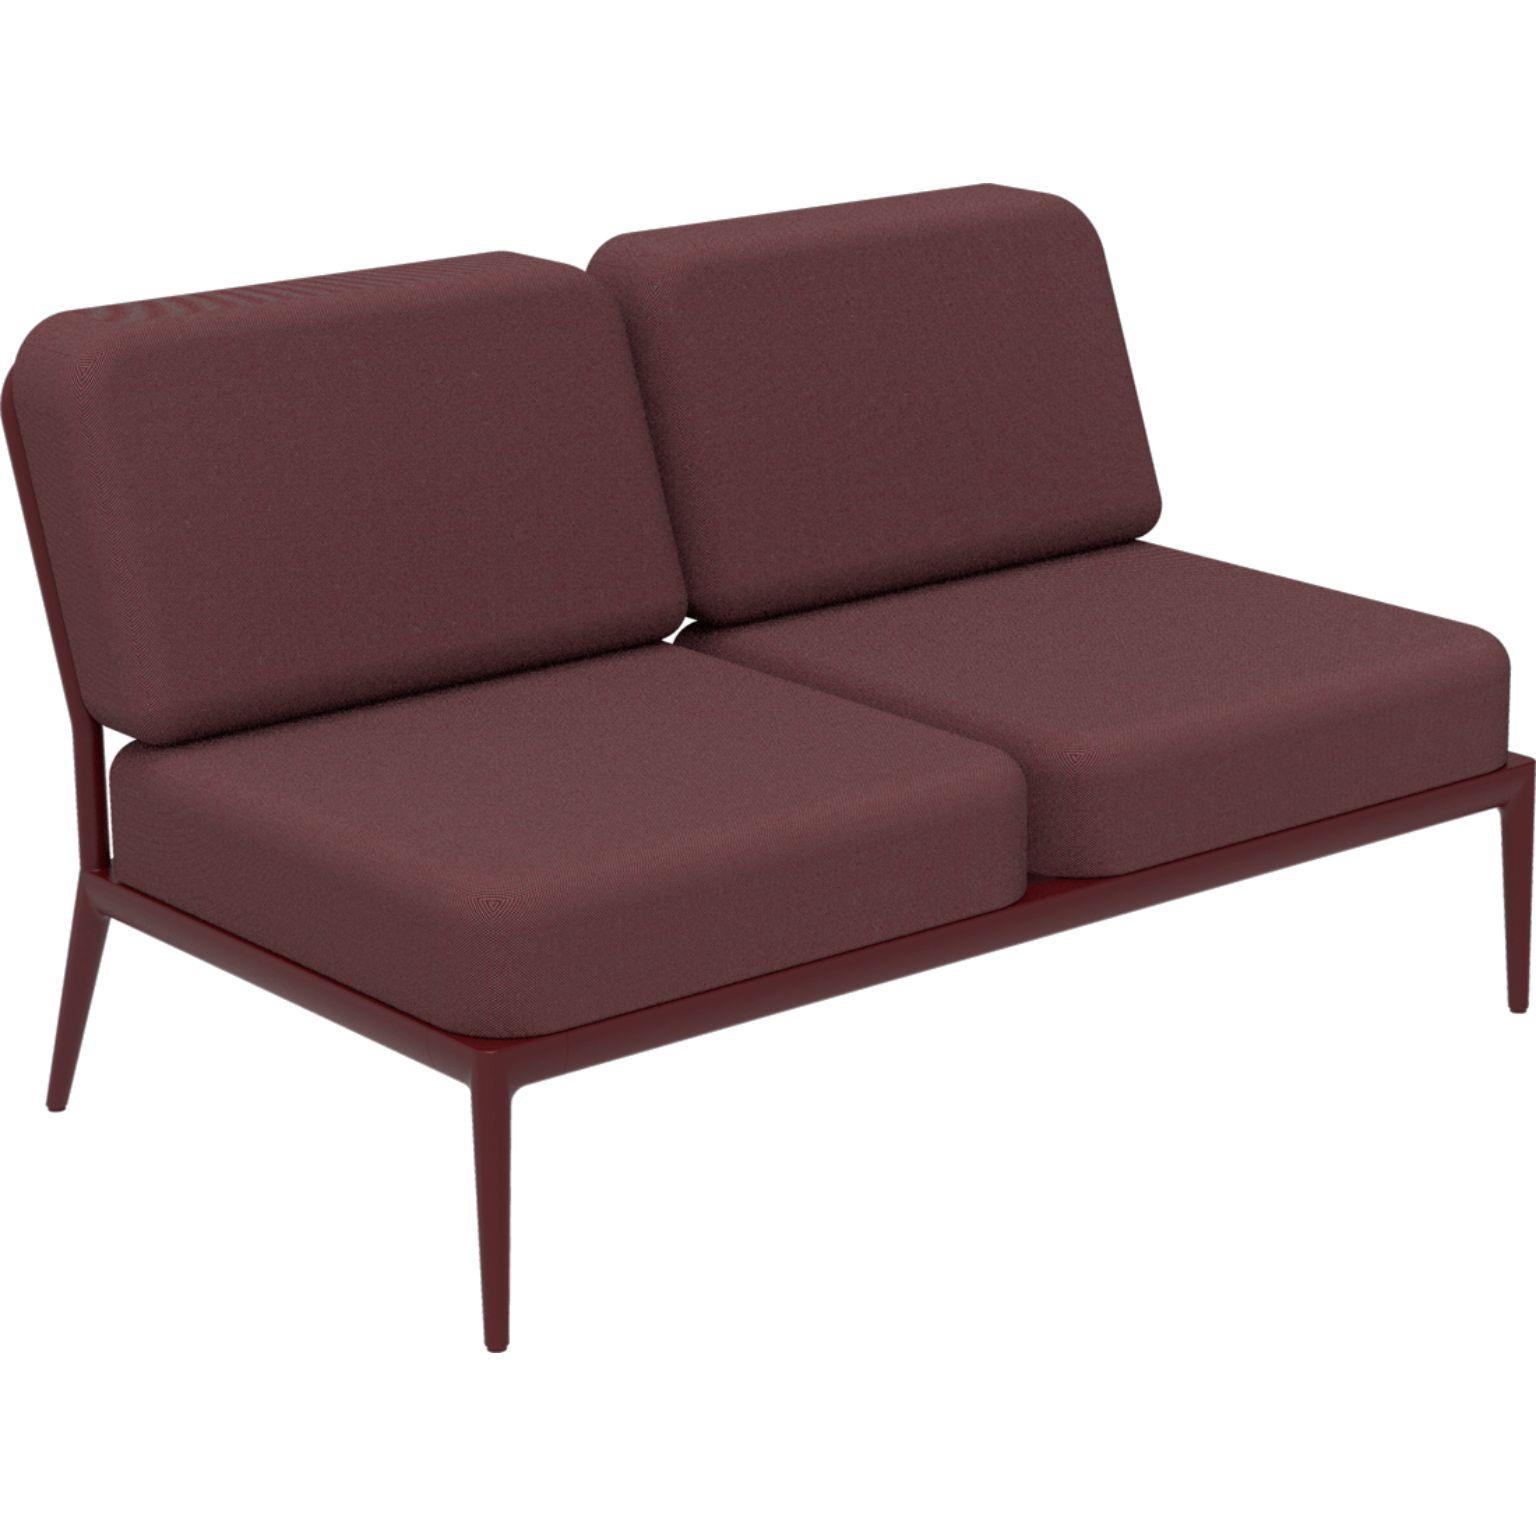 Nature burgundy double central modular sofa by MOWEE
Dimensions: D83 x W136 x H81 cm (seat height 42 cm).
Material: Aluminum and upholstery.
Weight: 27 kg.
Also available in different colors and finishes.

An unmistakable collection for its